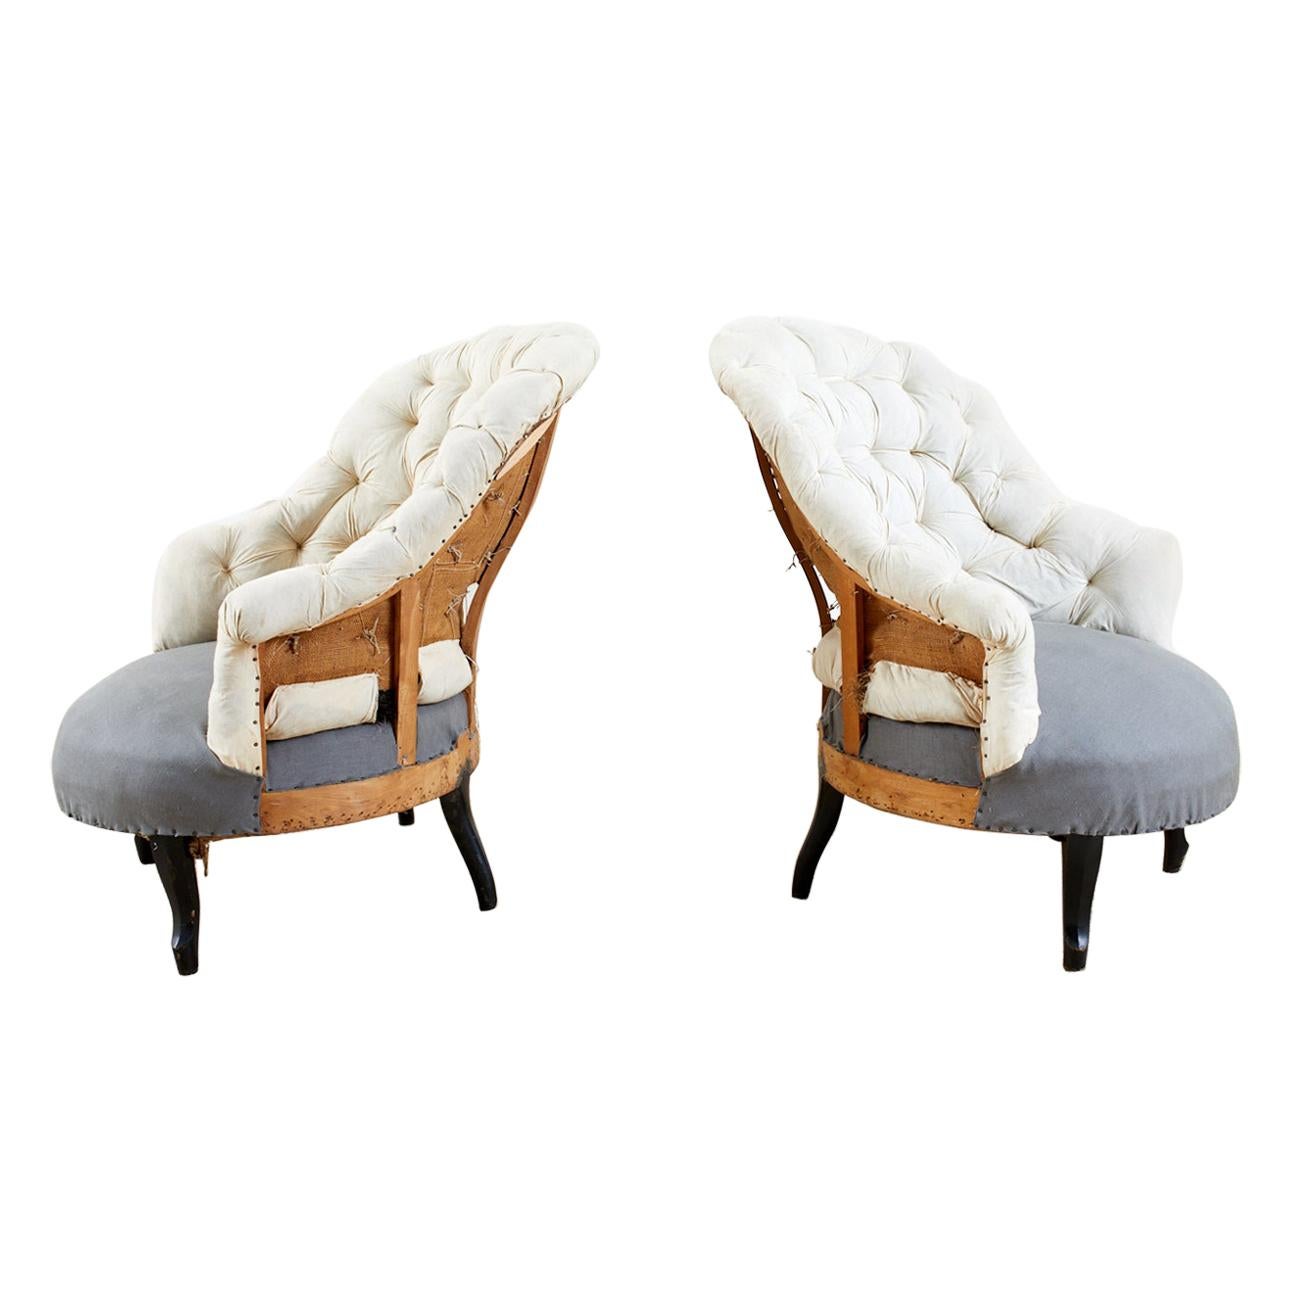 Pair of French Napoleon III Deconstructed Slipper Chairs